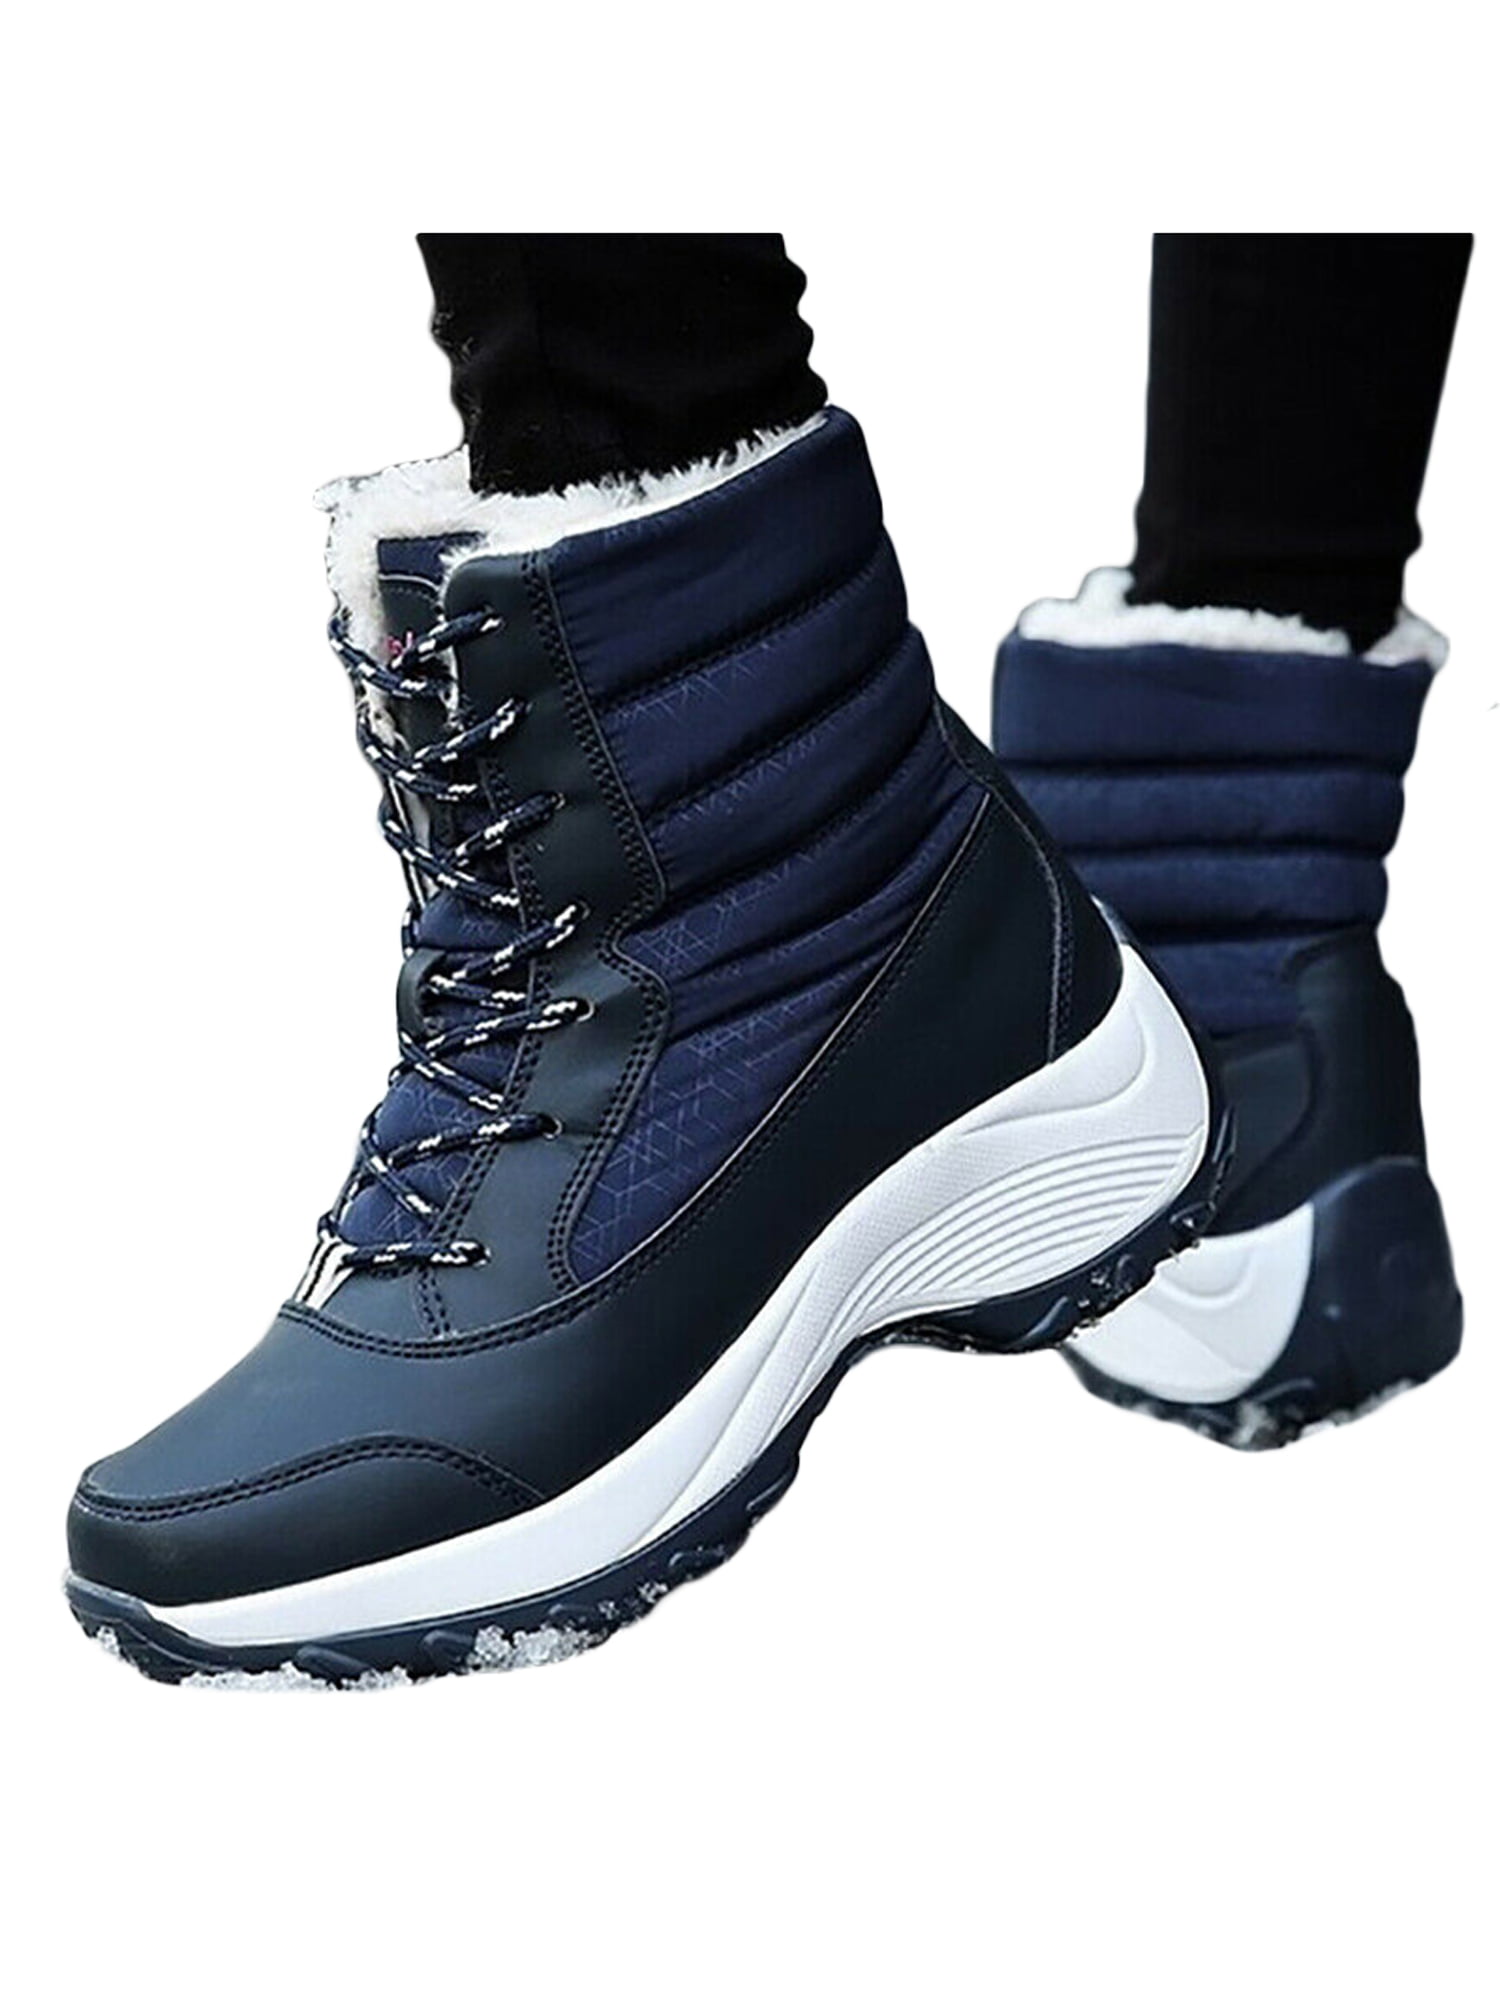 Women Winter Denim Snow Boots Flat Ankle Shoes Double Zip Thicken Martin Boots Z 